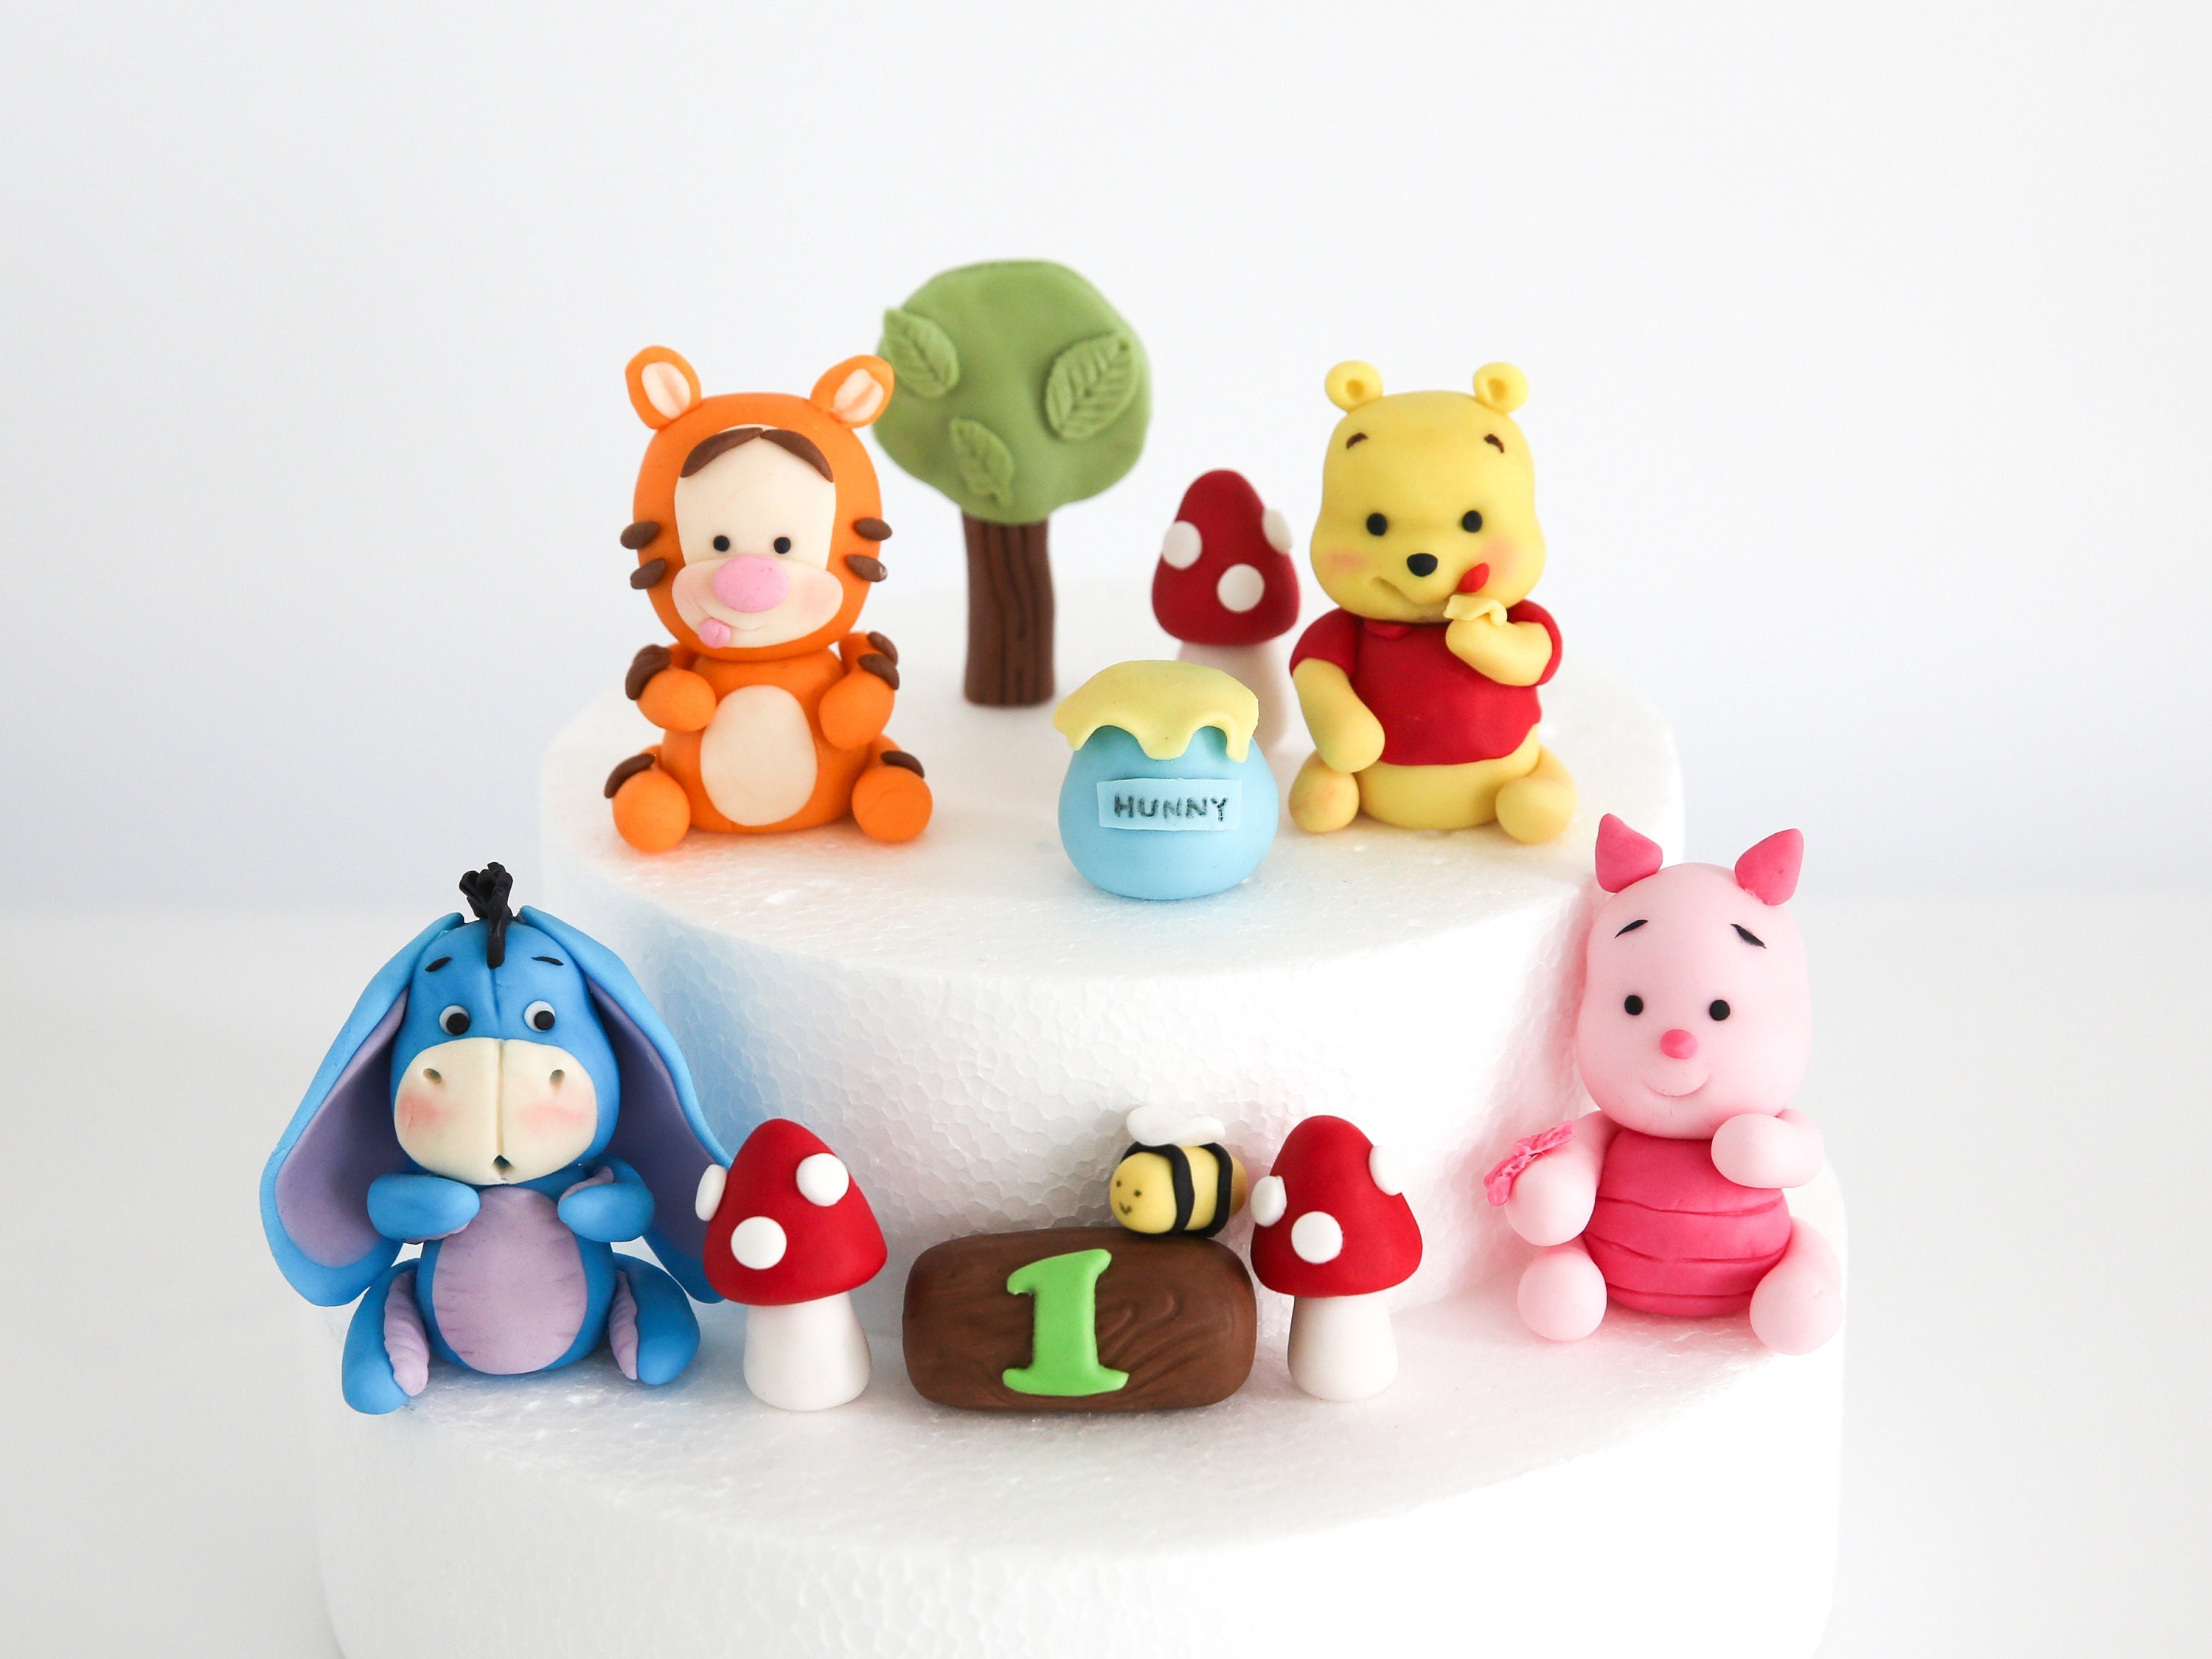  MEMOVAN Winnie The Pooh Cake Topper, Pooh Bear Cake Topper  Cupcake Topper, Winnie Characters Toys Mini Figurines Collection Playset,  Pooh Cake Decoration for Kids Birthday Baby Shower Party Supplies : Toys